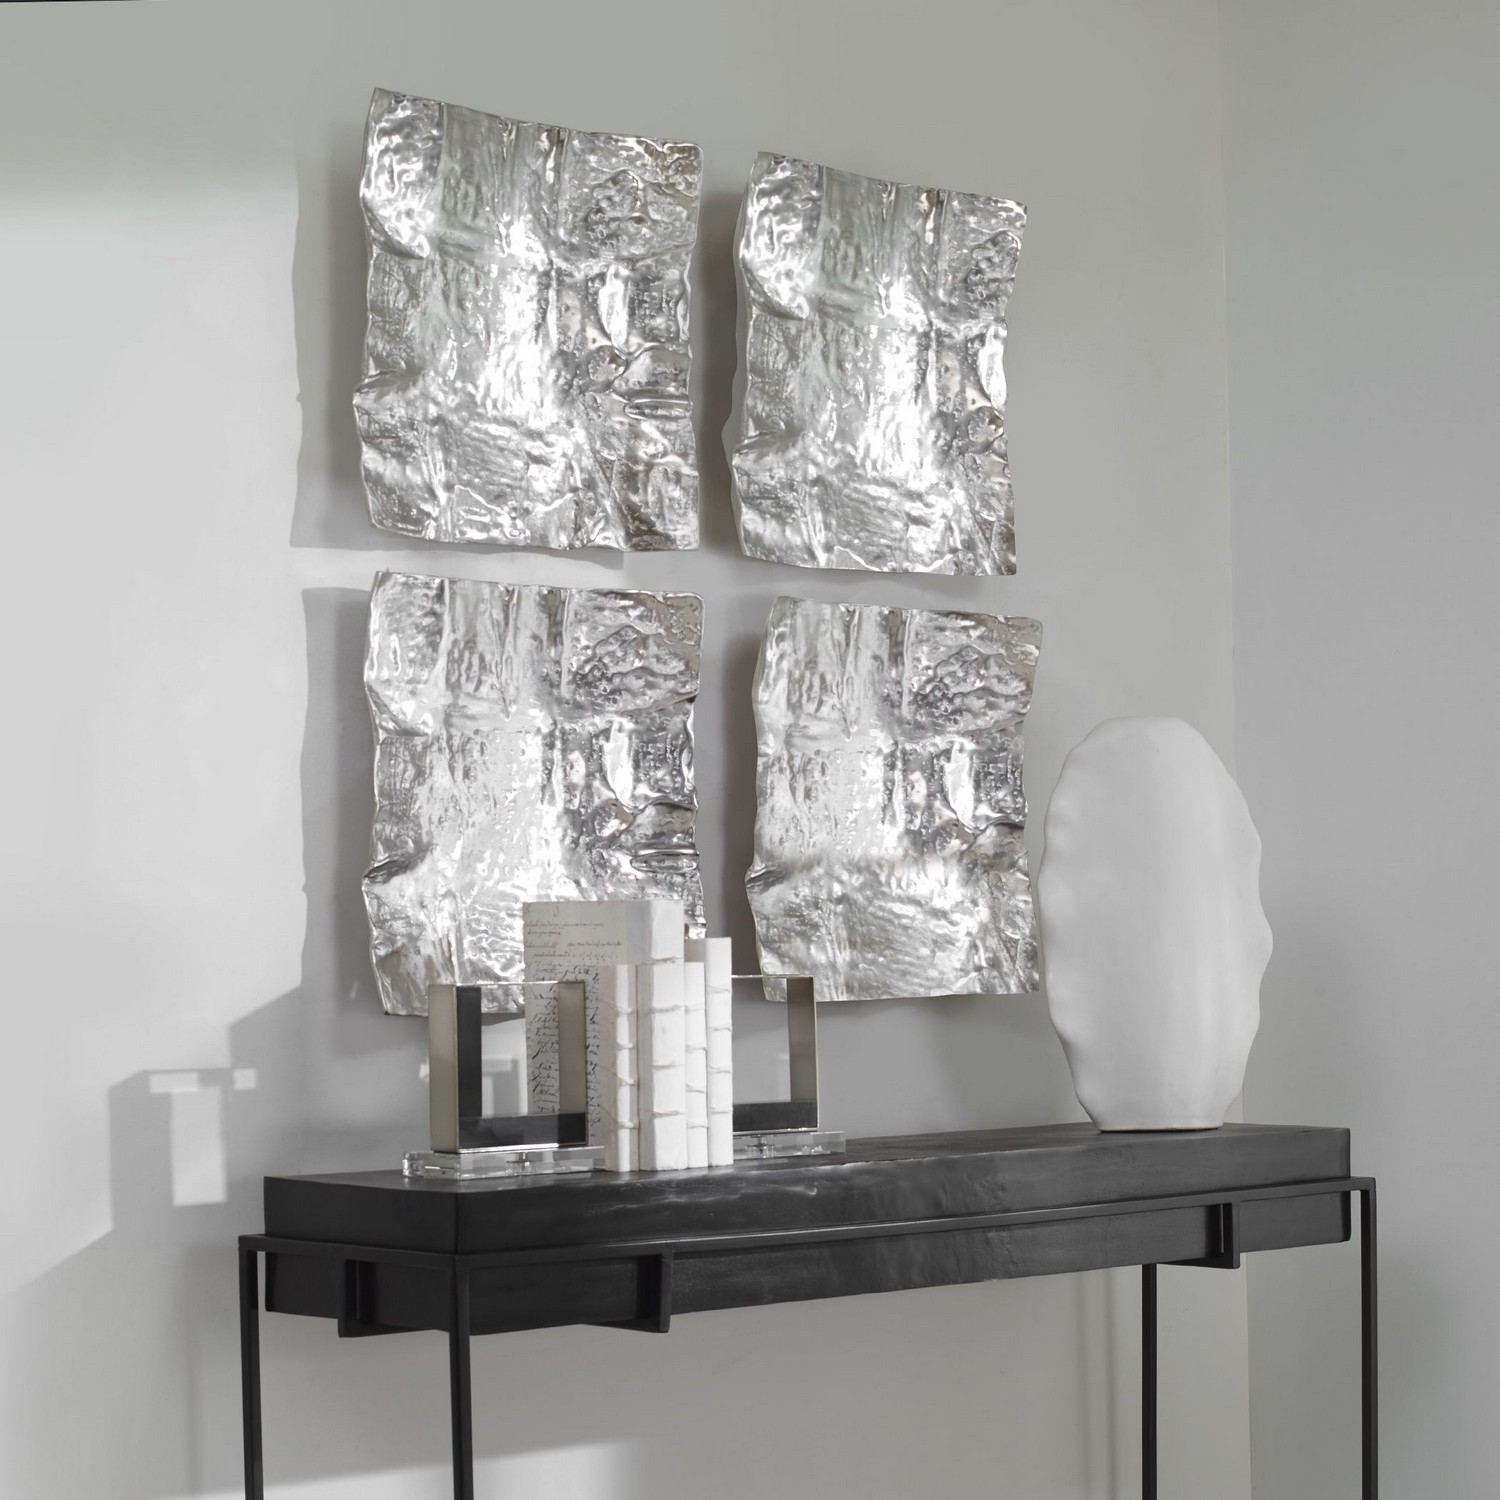 Uttermost Archive Wall Decor - Nickel